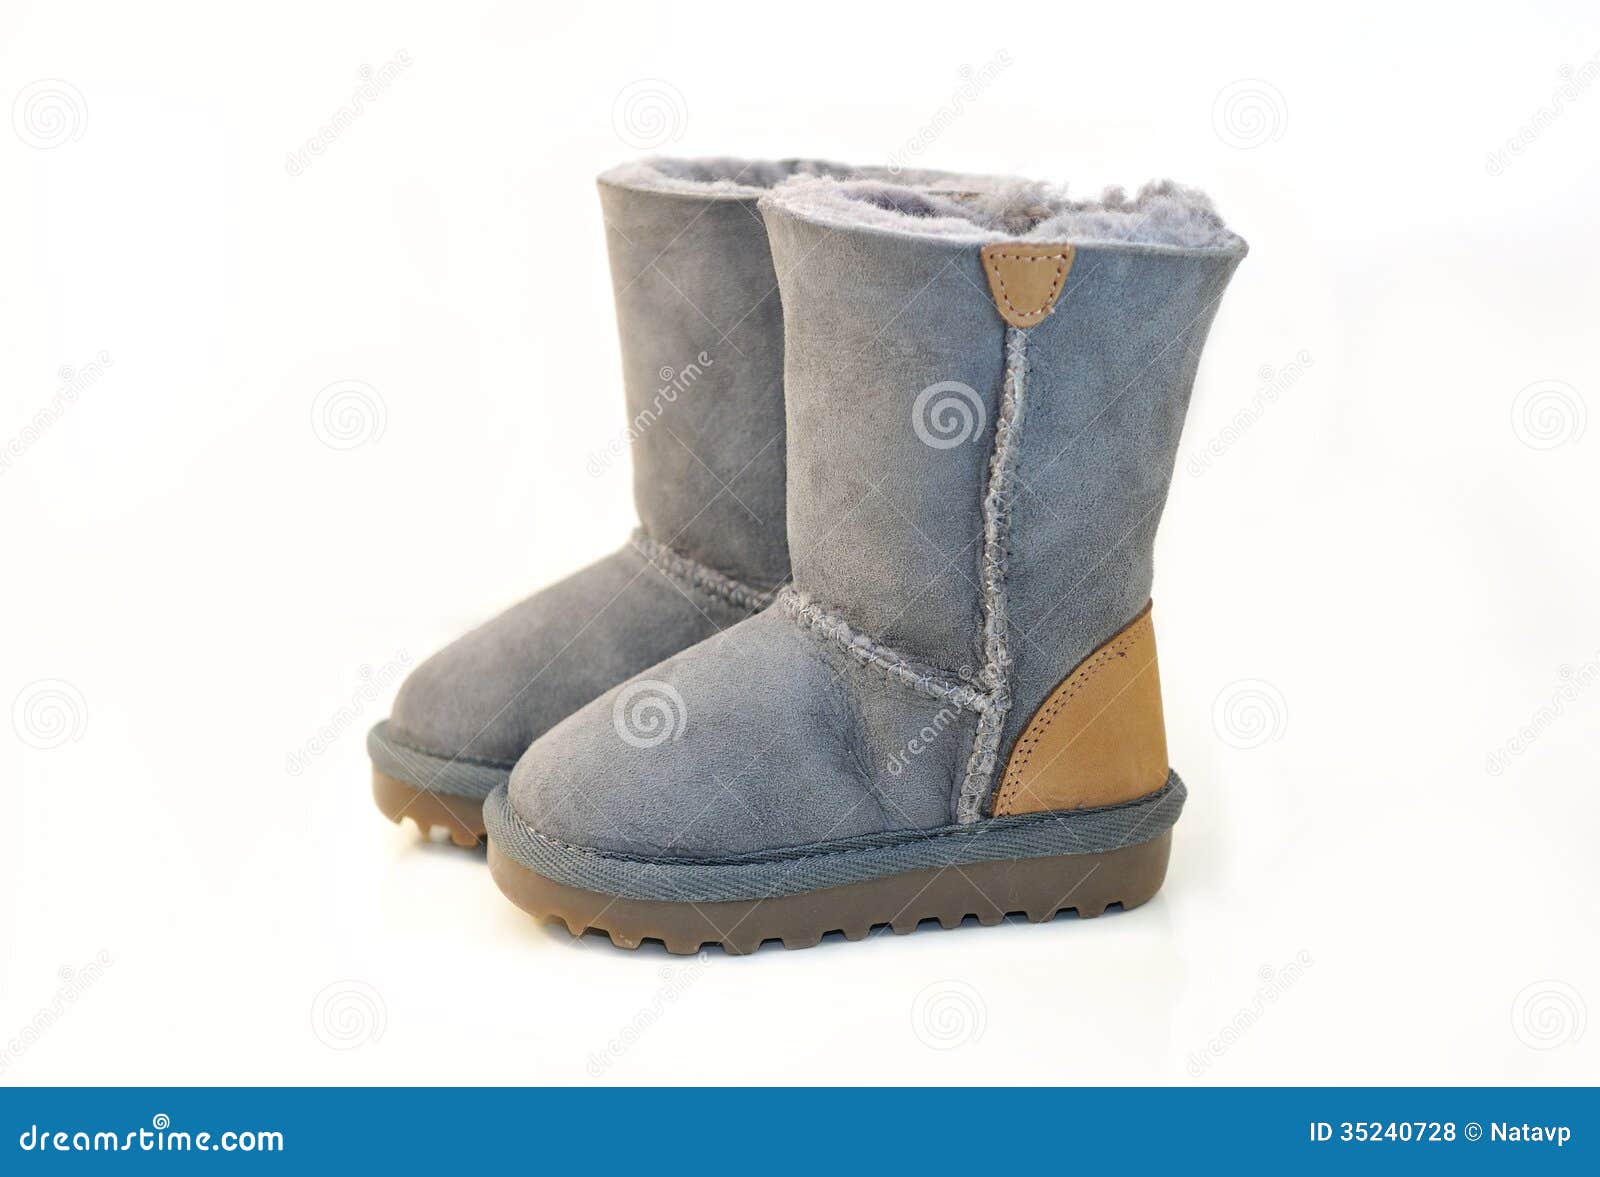 clipart of snow boots - photo #19